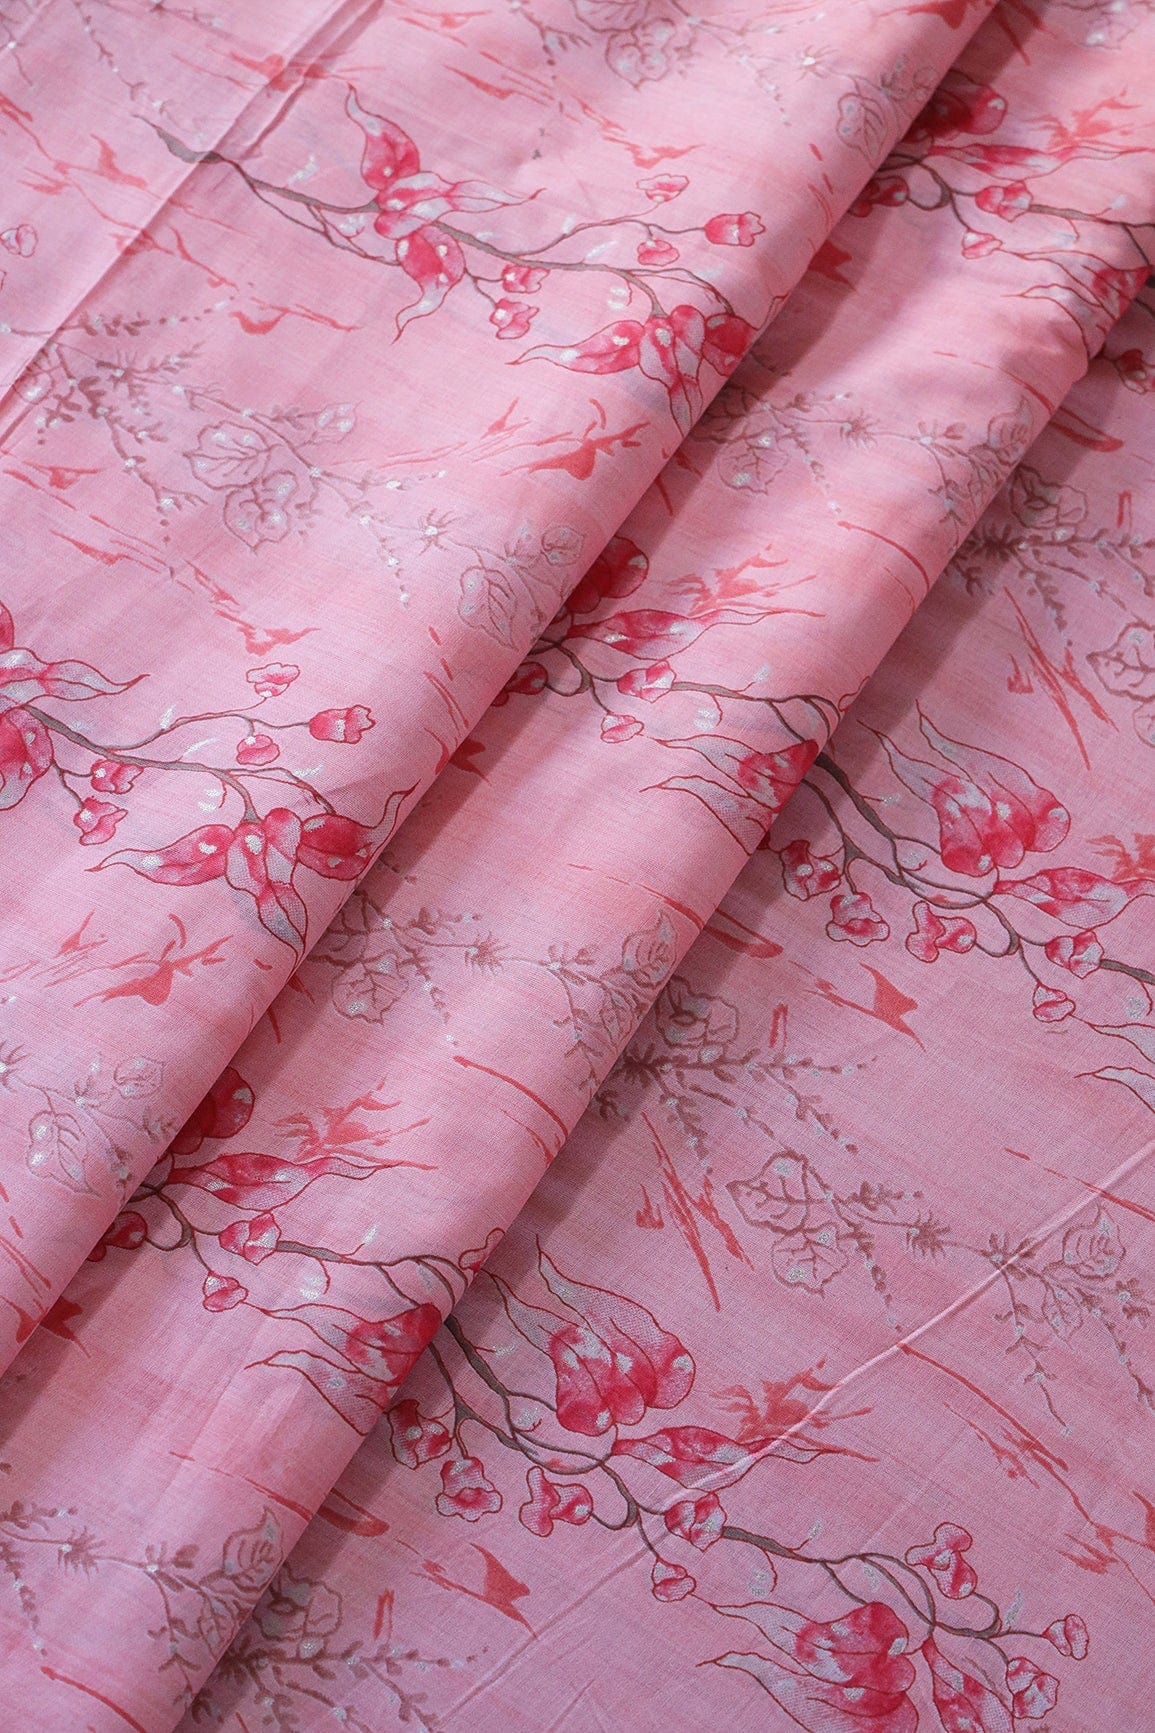 doeraa Prints Pastel Pink And Brown Foil Floral Print On Pure Mul Cotton Fabric